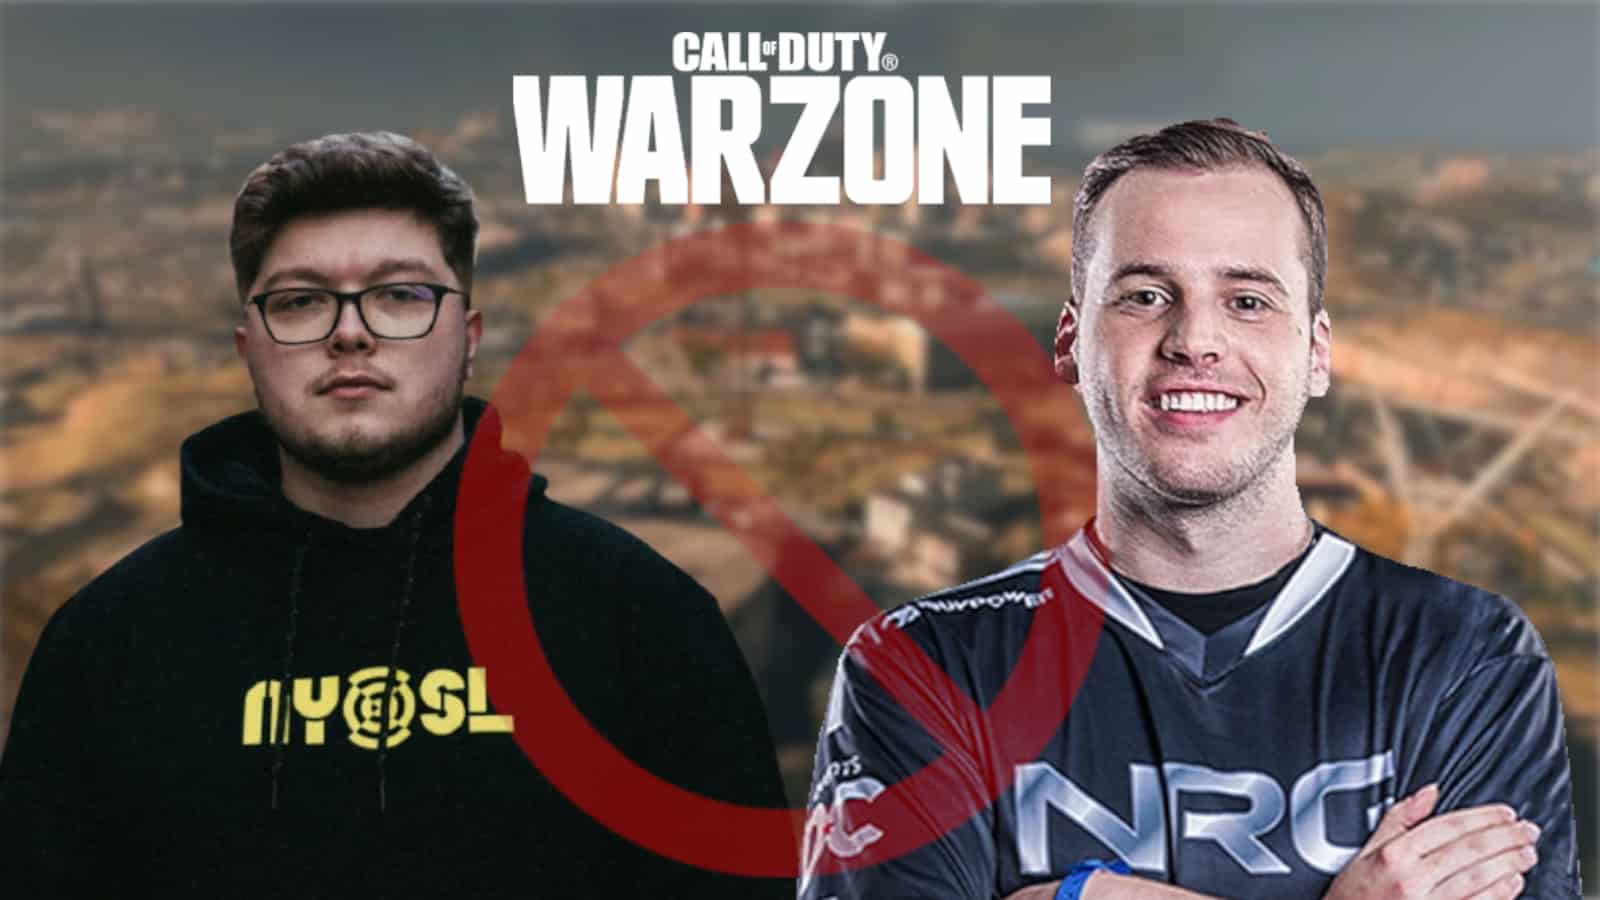 Warzone pros Aydan & HusKerrs get hacker banned live on stream